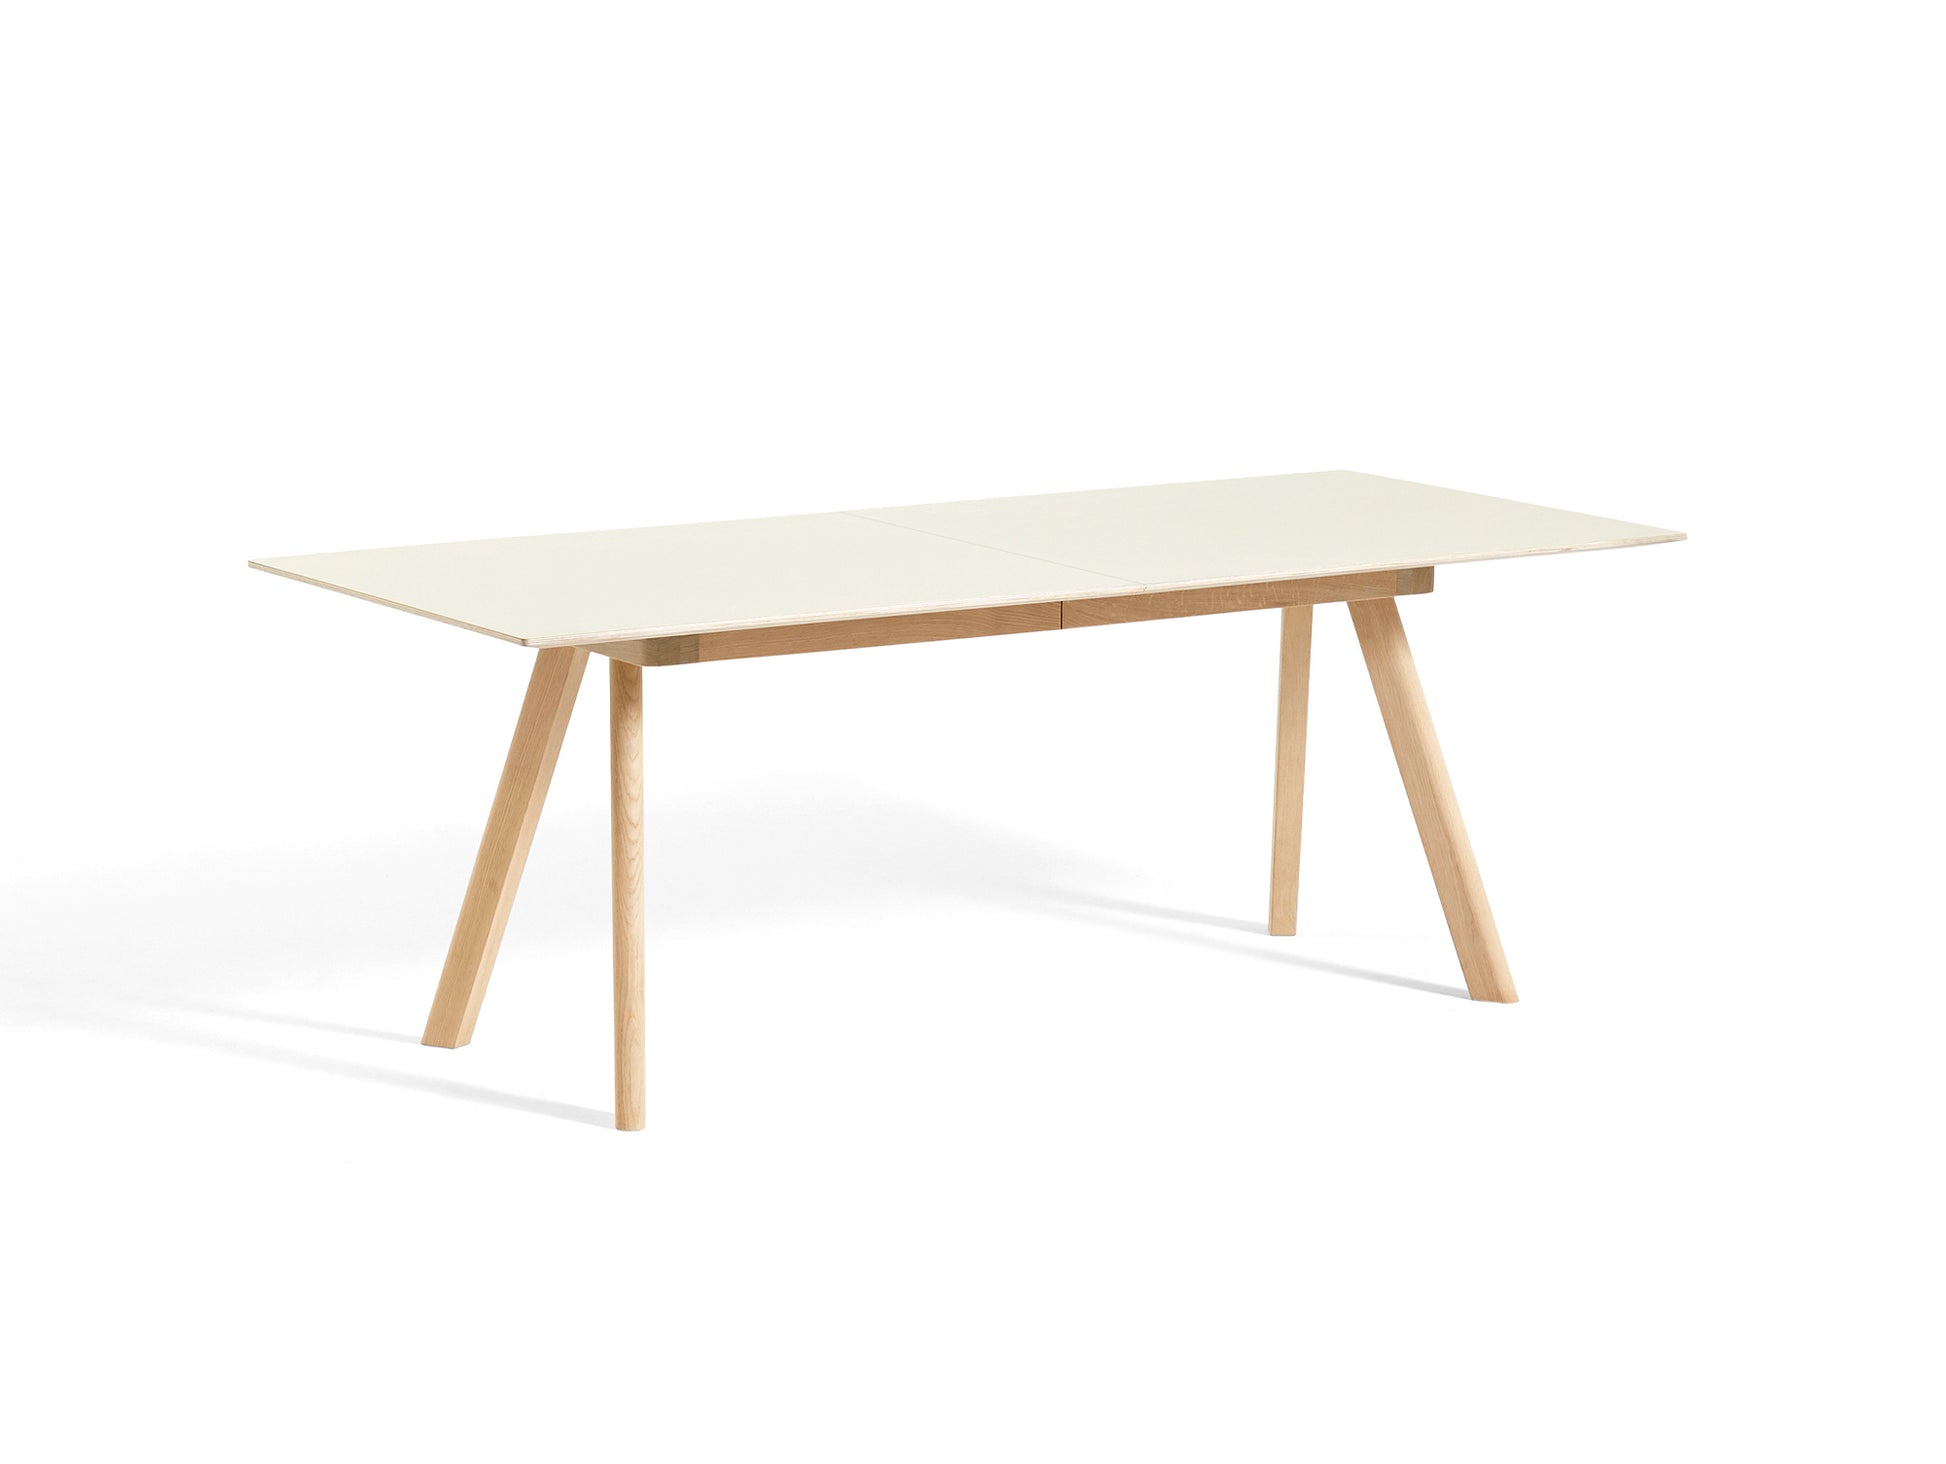 CPH30 Extendable Dining Table by HAY - L200 cm / Off-White Linoleum Tabletop with Lacquered Oak Base